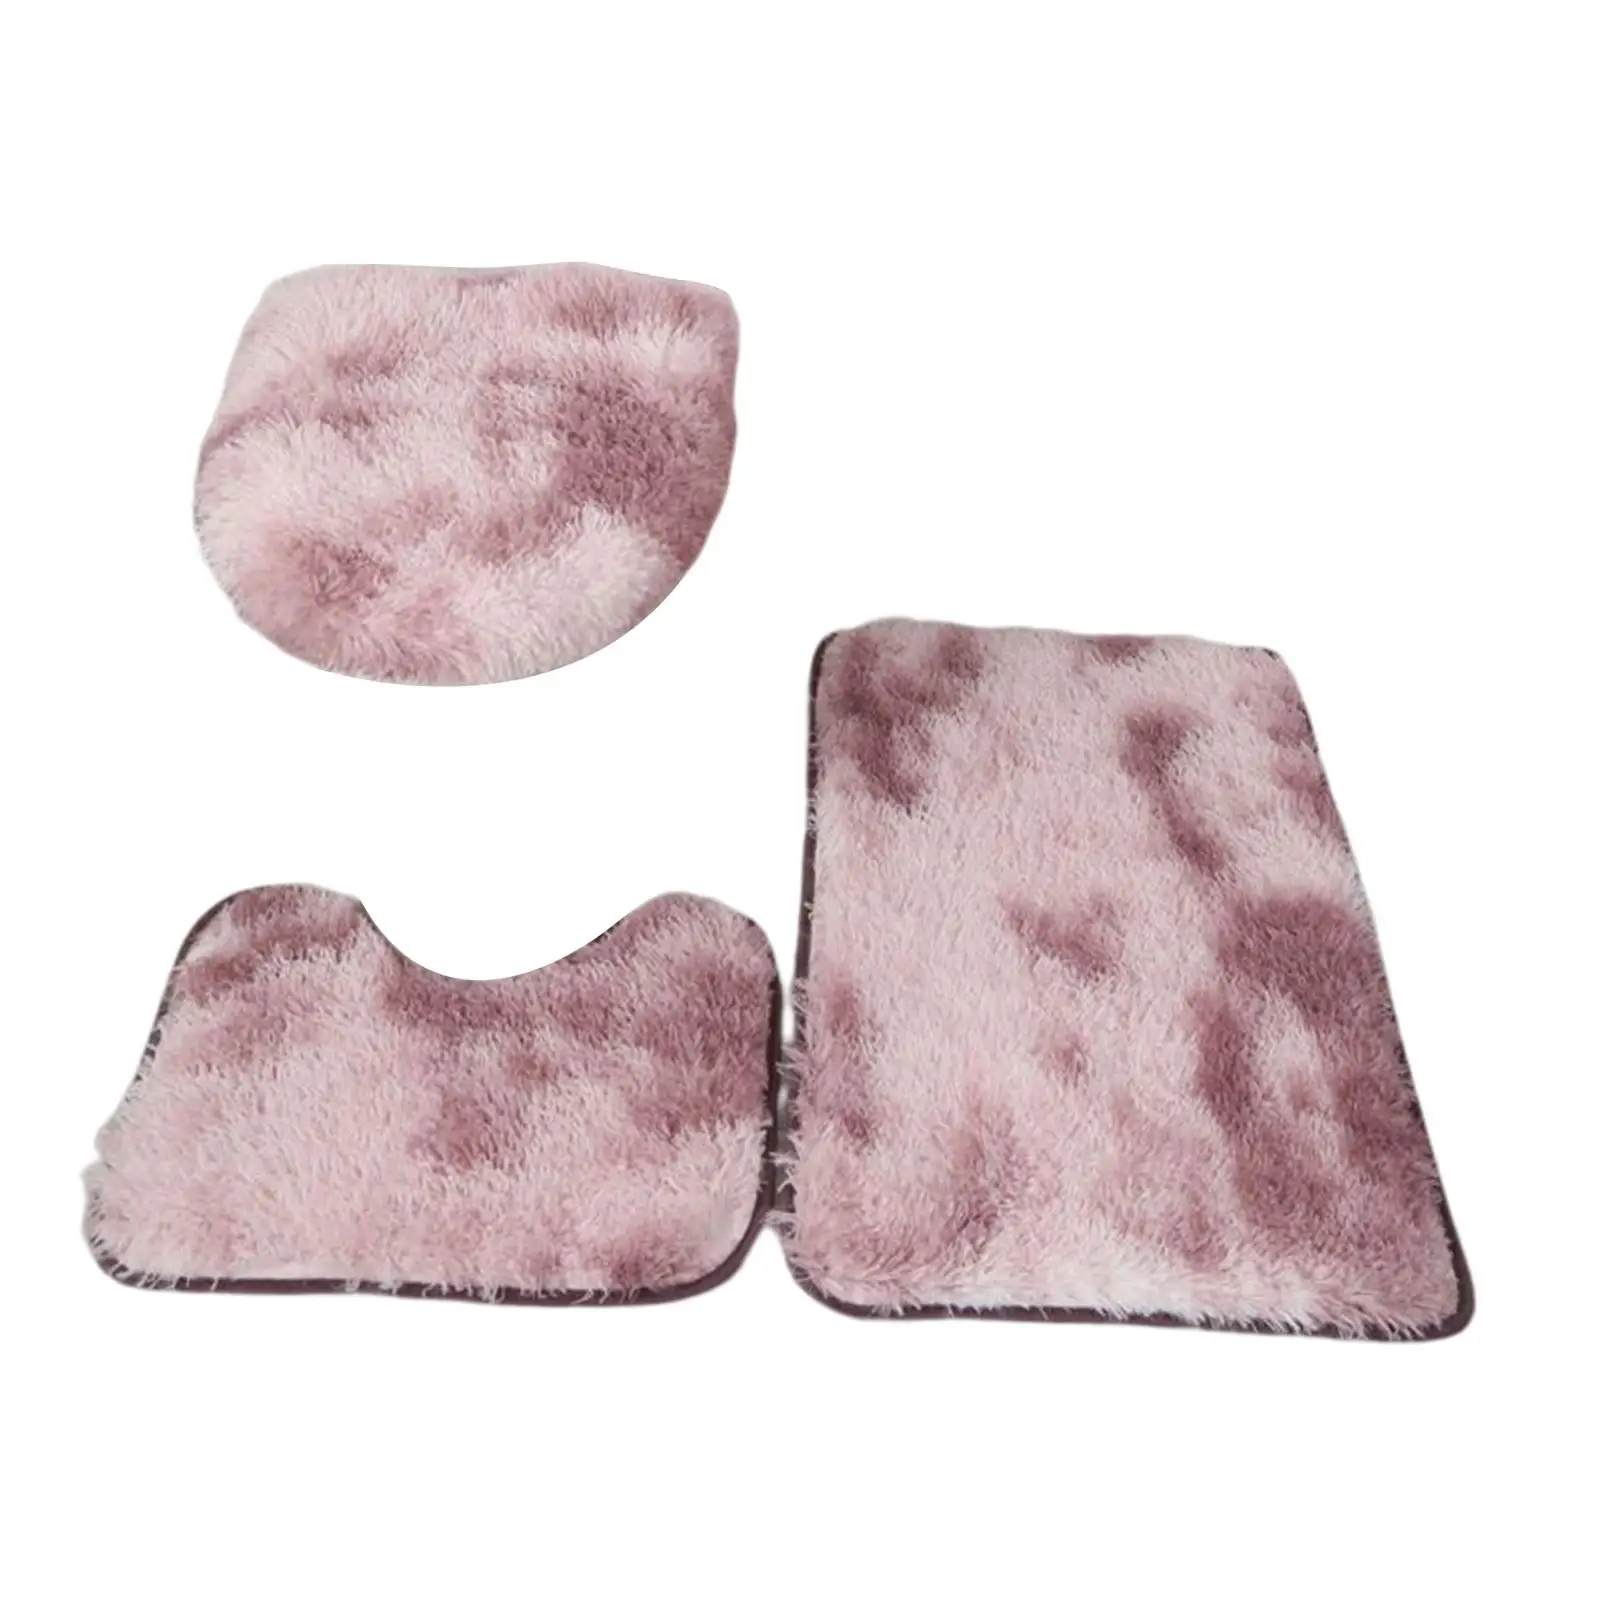 3Pcs Bathroom Rug Sets with Toilet Cover Water Absorbent Large for Bathtubs